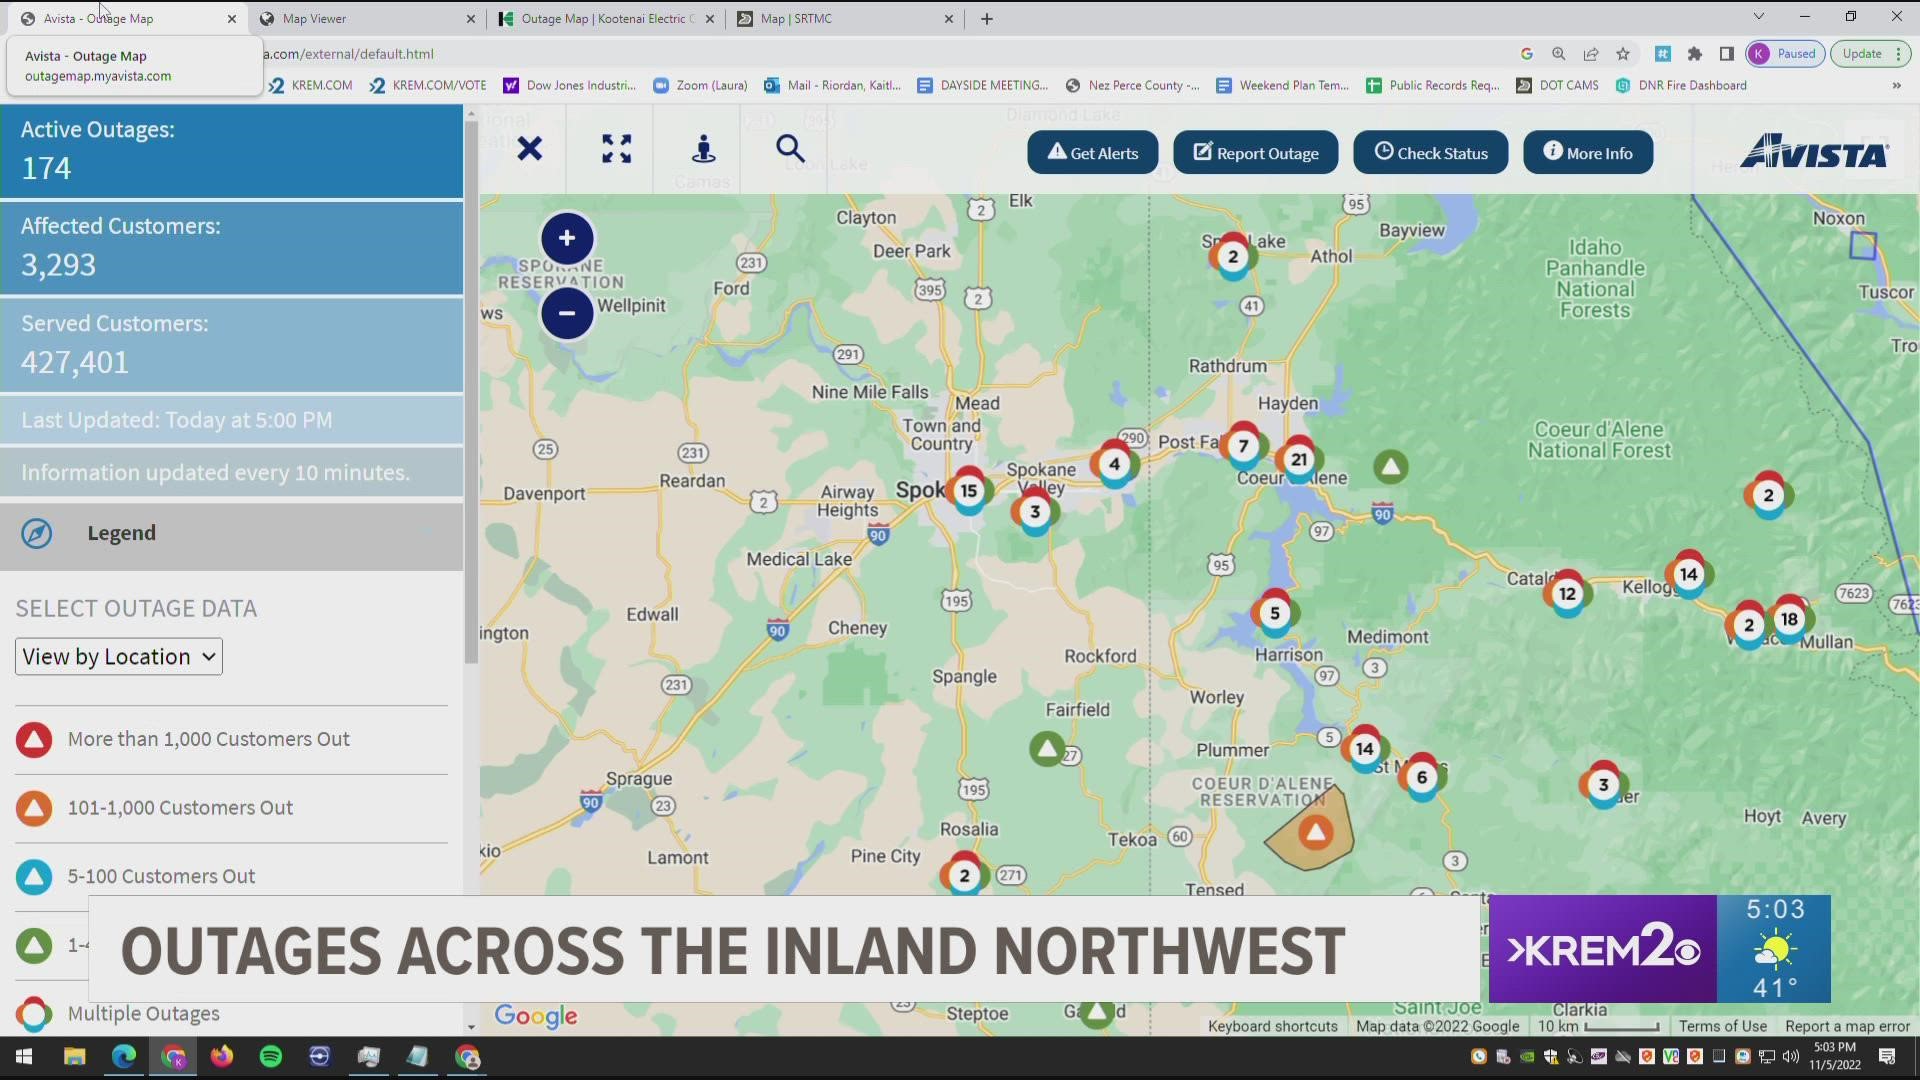 More than 405 people in North Idaho are still without power. In Spokane, Avista crews are still working to restored the power for more than 3,000 customers.